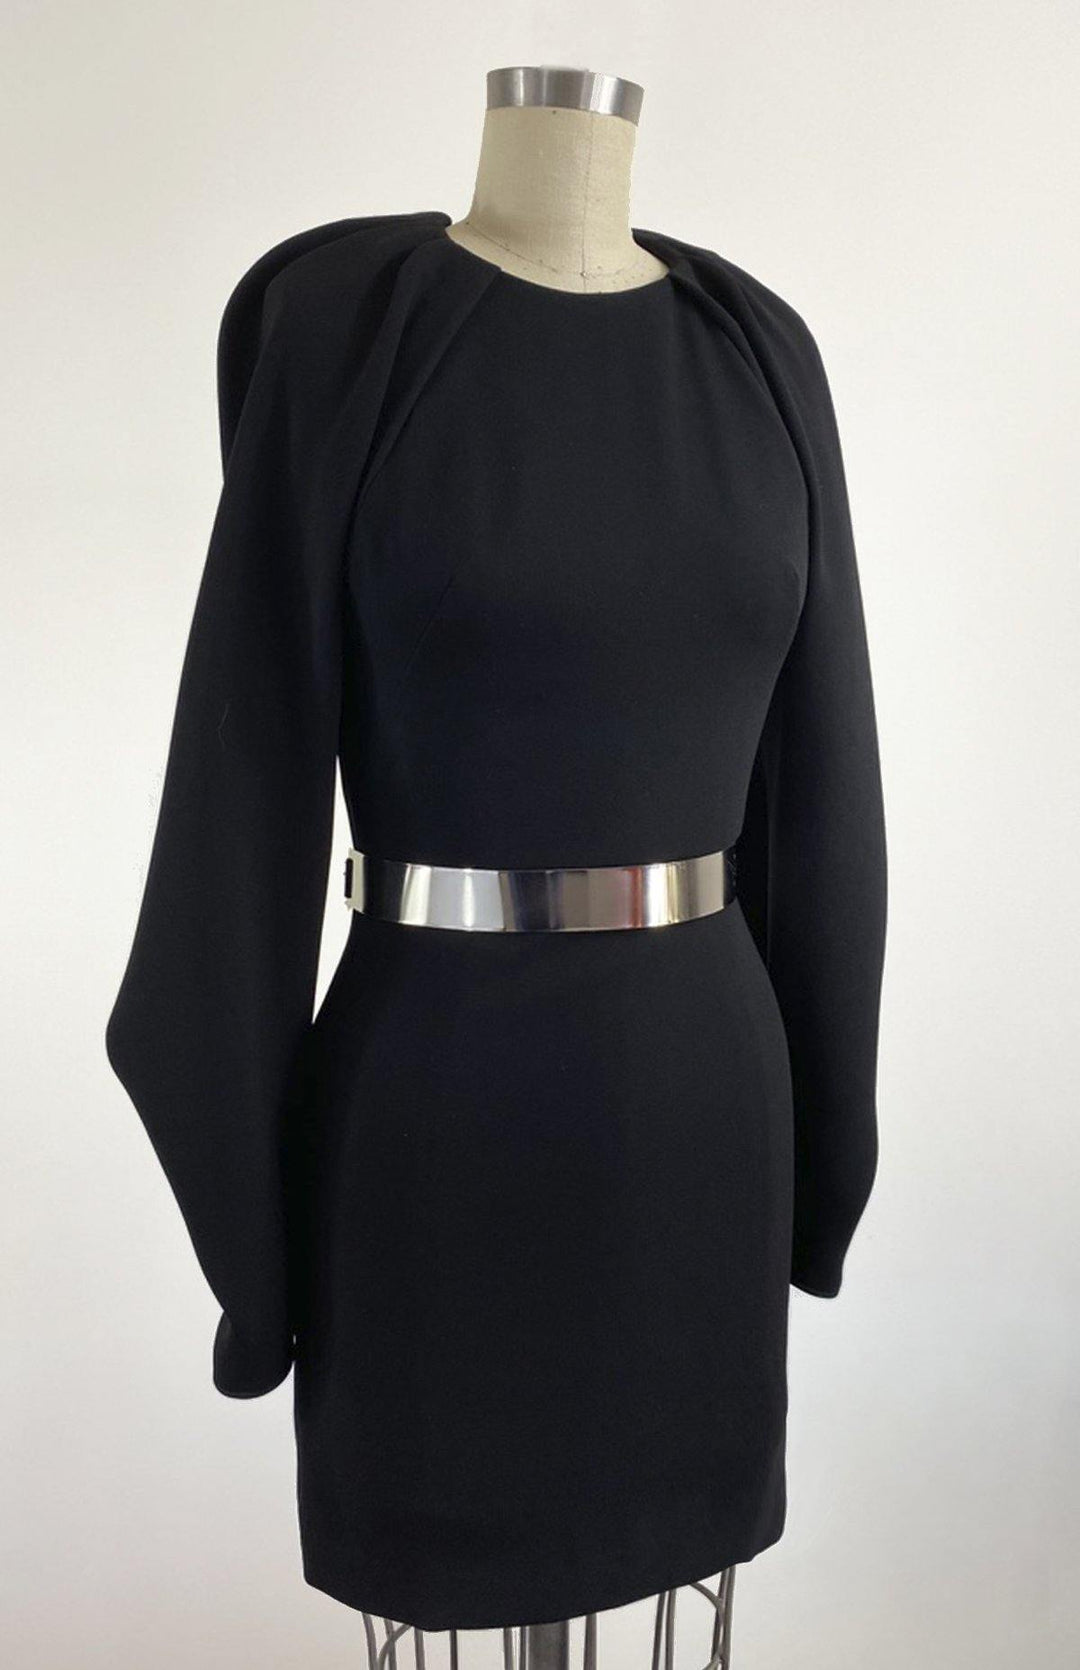 A one-off piece and the perfect little black dress. This is a short backless style with oversized draped sleeves and closed neck with pleated detailing.